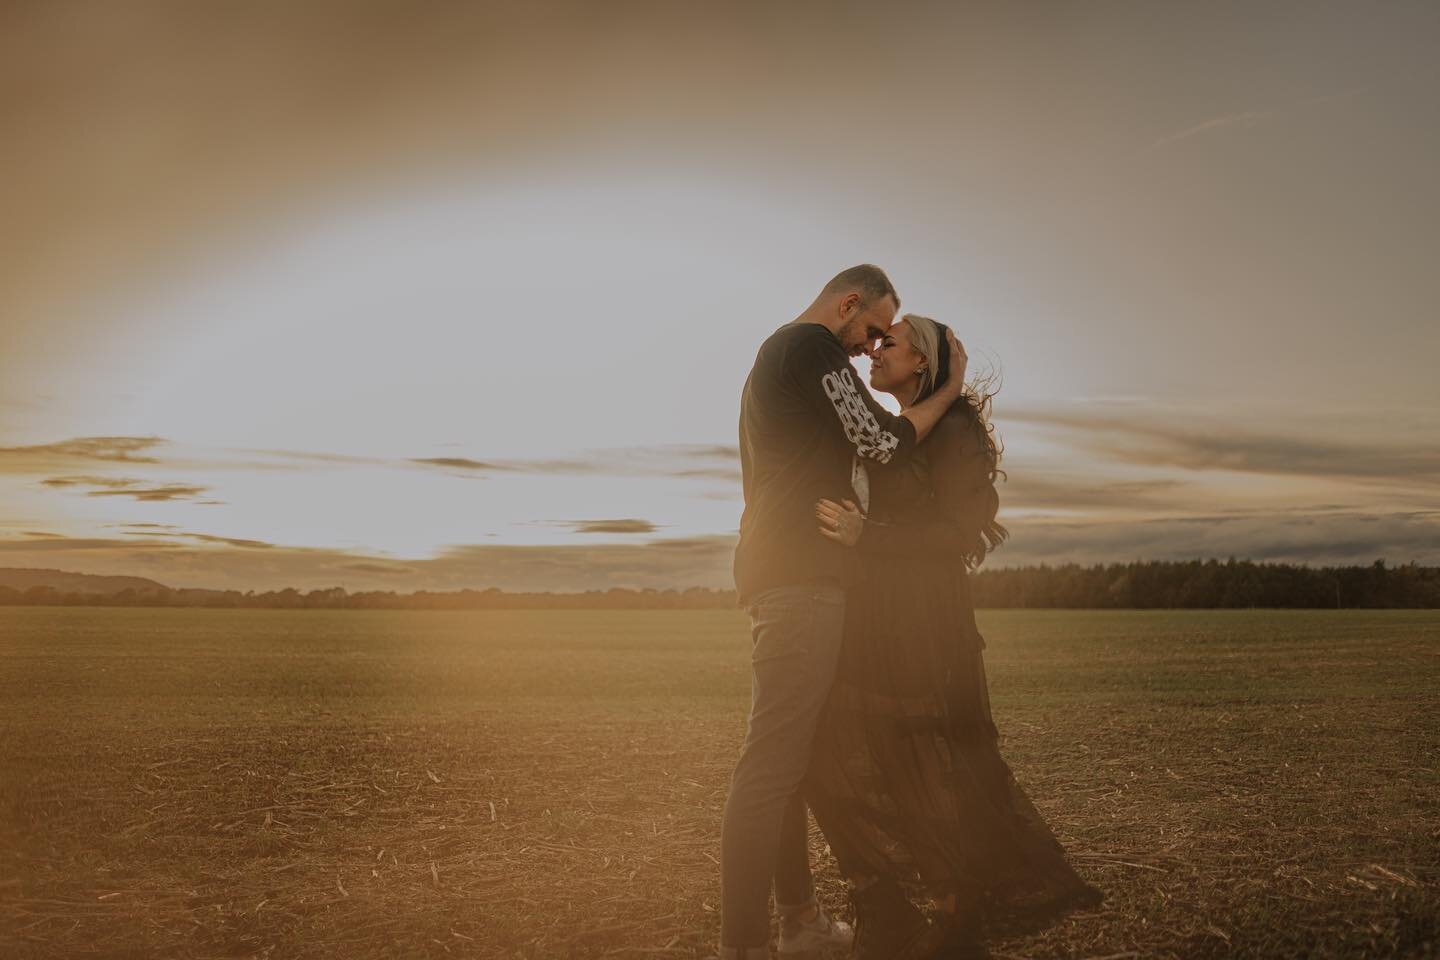 hana + chris &ldquo;some love stories are painted in black&rdquo;
A wee frolic around tentsmuir 🖤